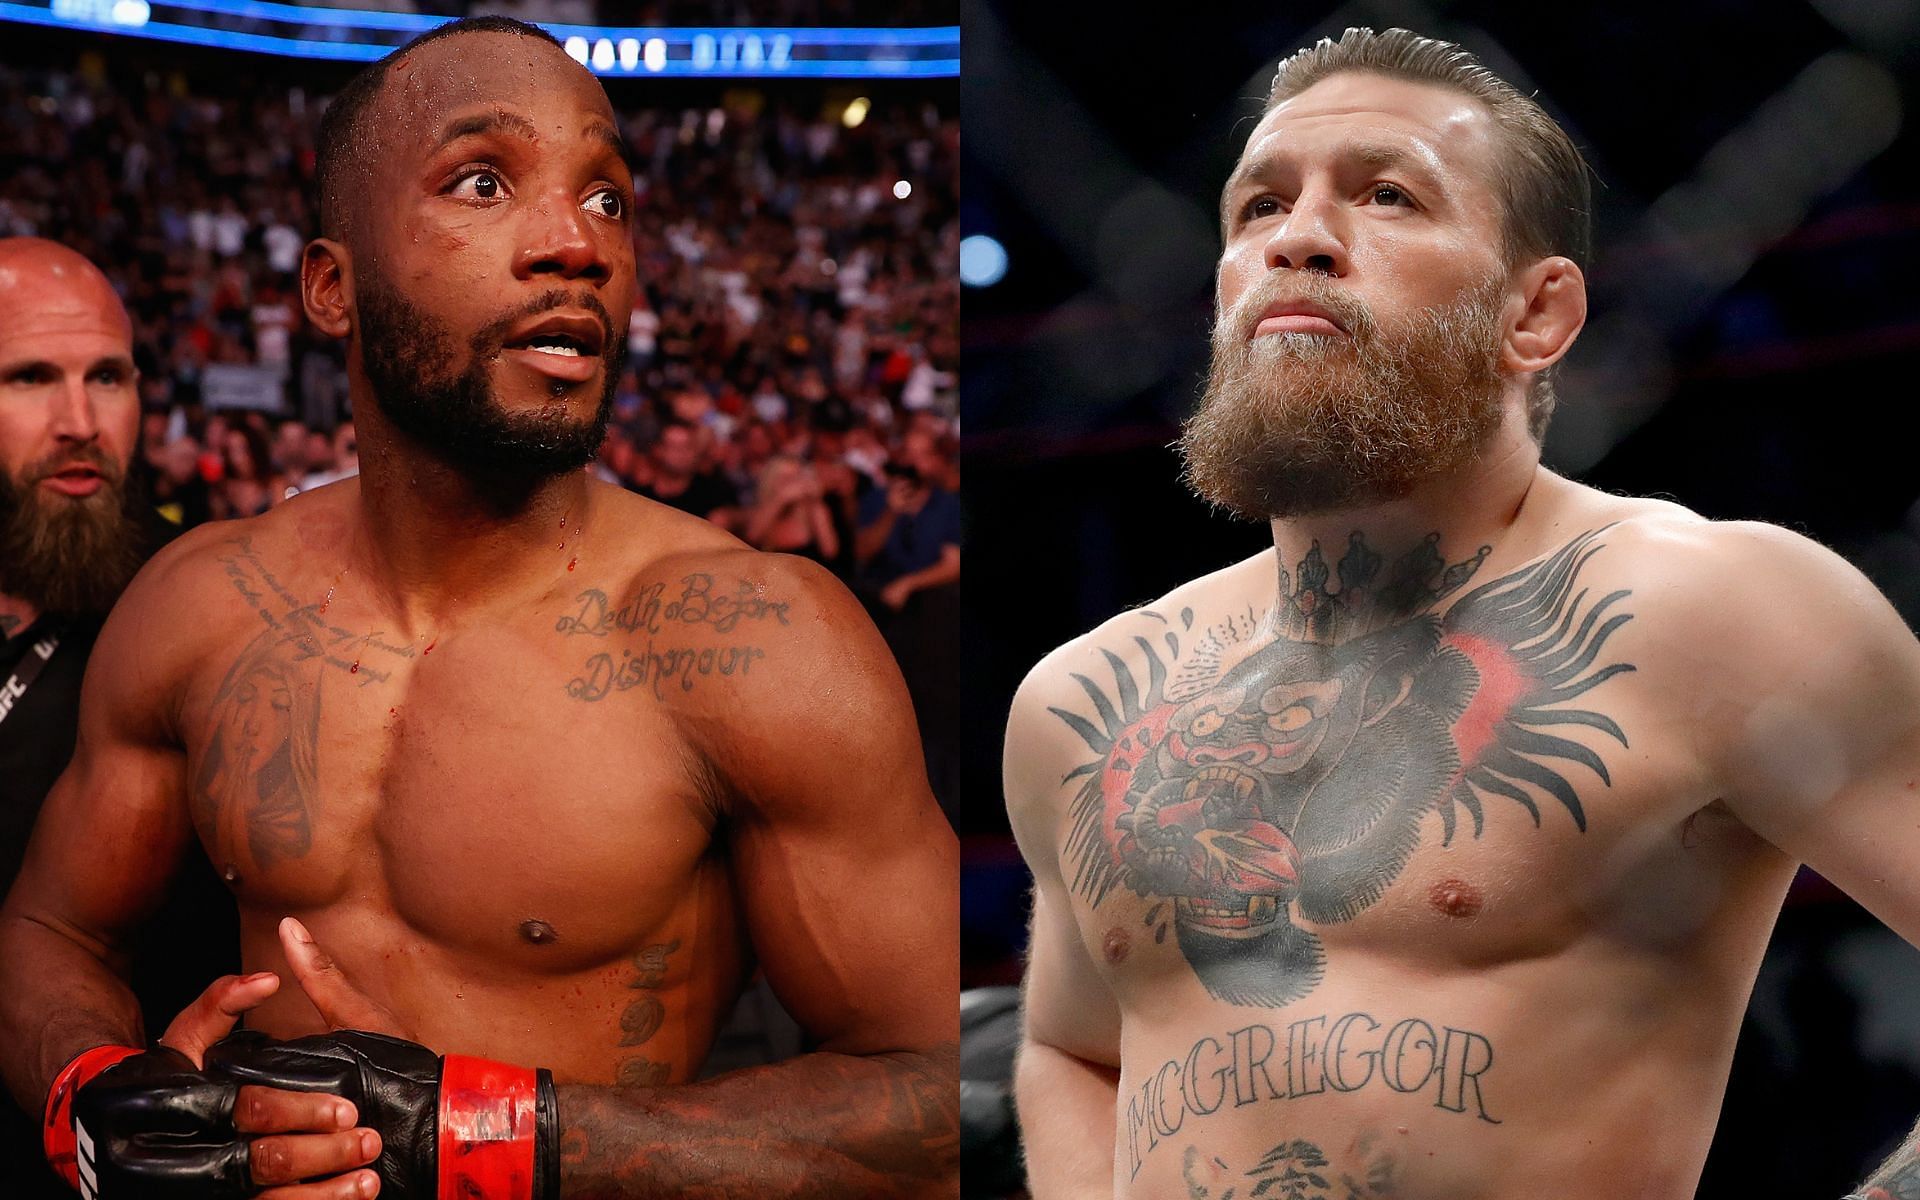 Leon Edwards (left) and Conor McGregor (right) are well-known for their outstanding striking skills [Images courtesy: Getty Images]